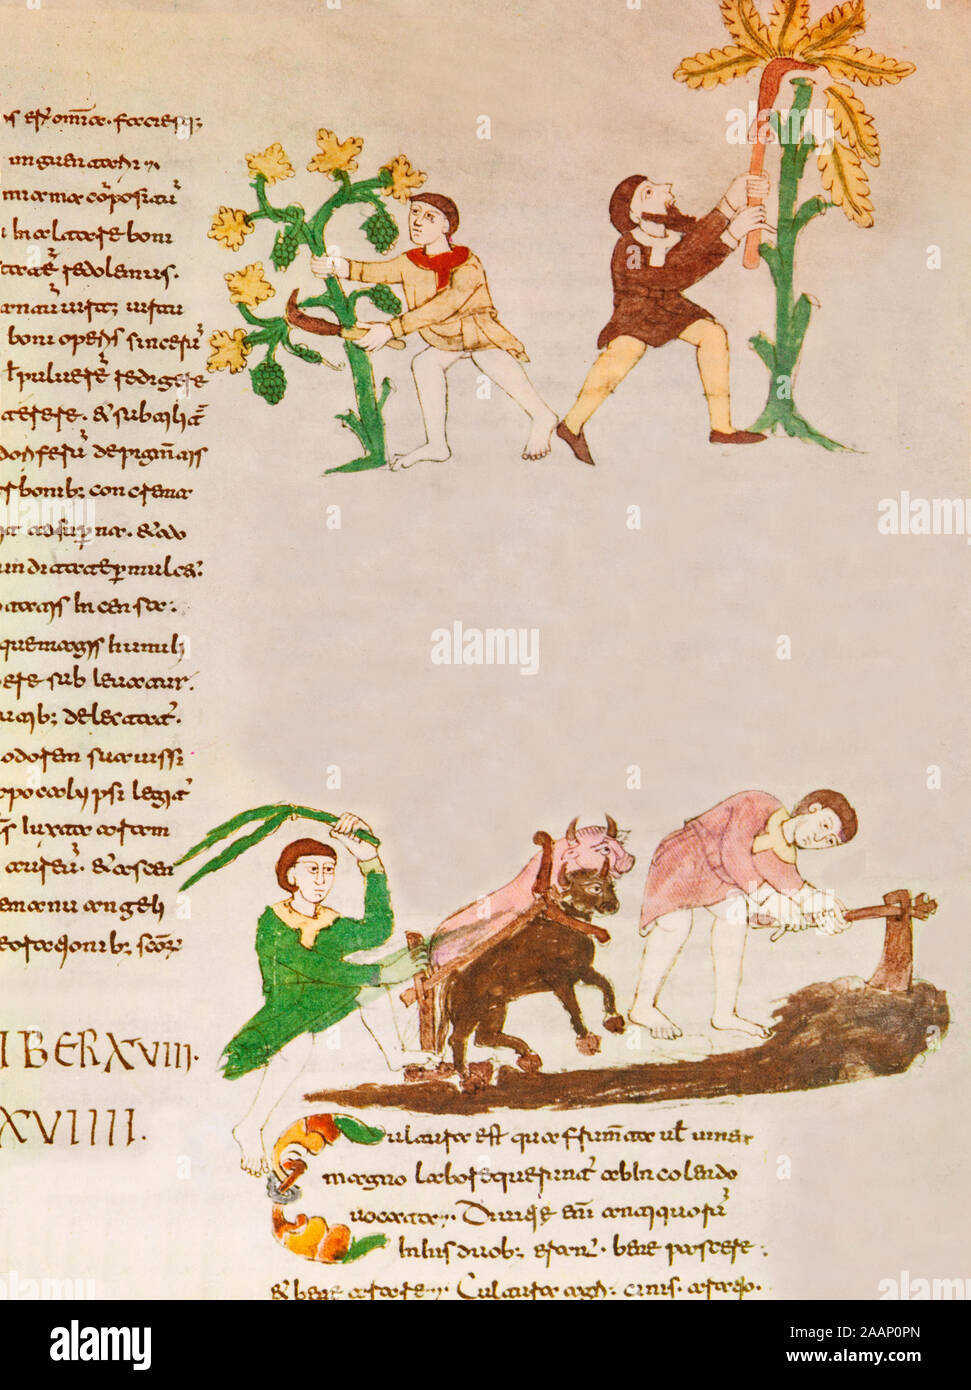 Farmers at work from a medieval minature manuscript found in the Benedictine monastery of Monte Casino, Italy. Stock Photo